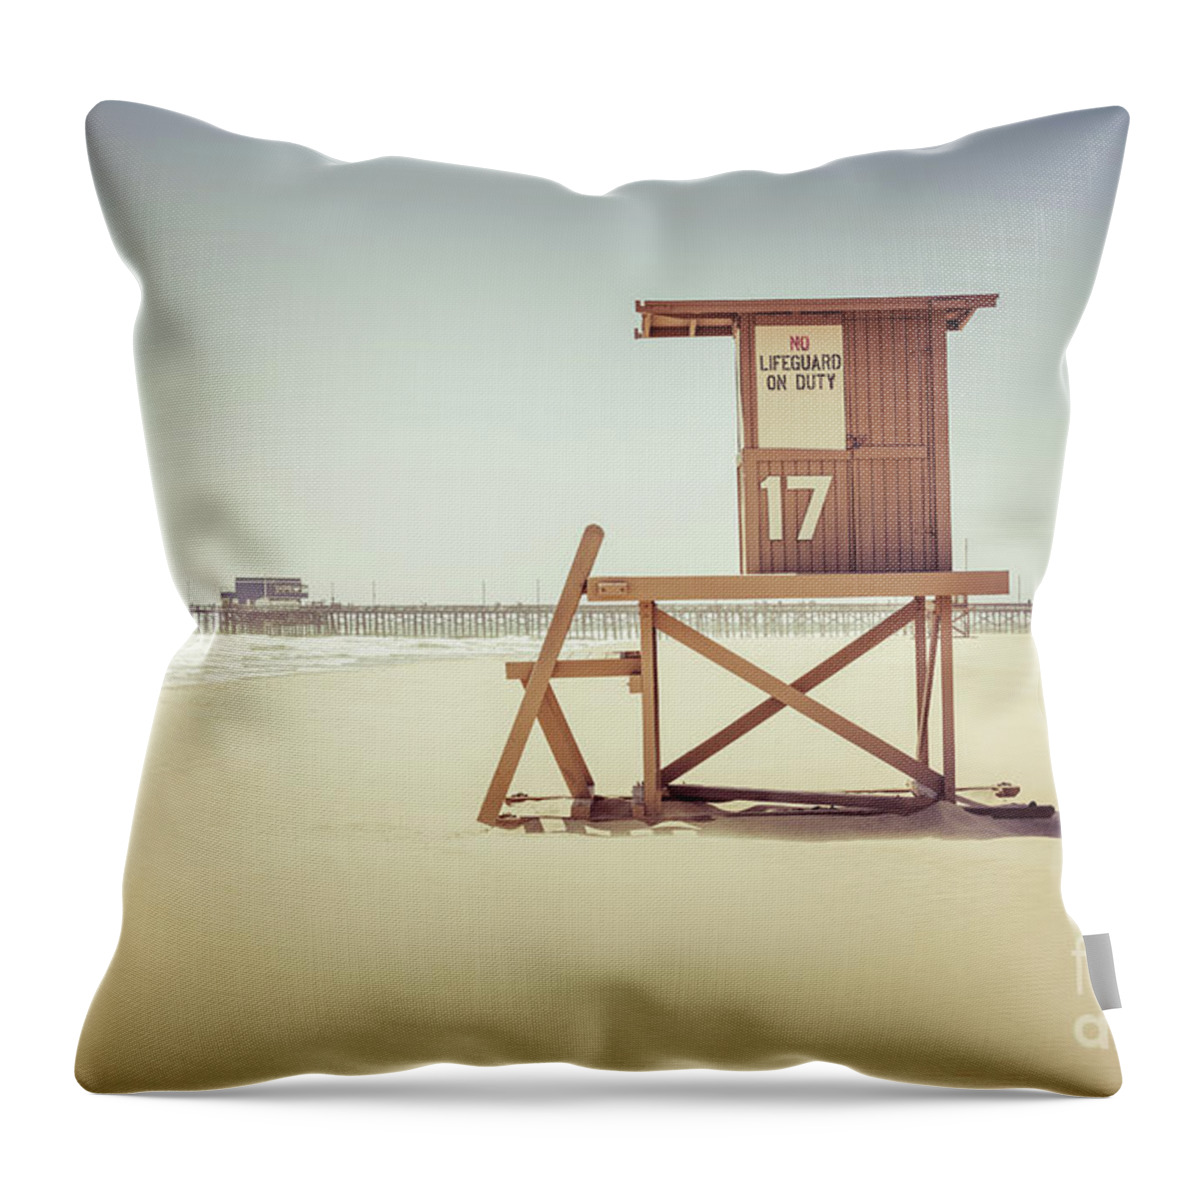 17th Throw Pillow featuring the photograph Newport Beach Pier and Lifeguard Tower 17 by Paul Velgos